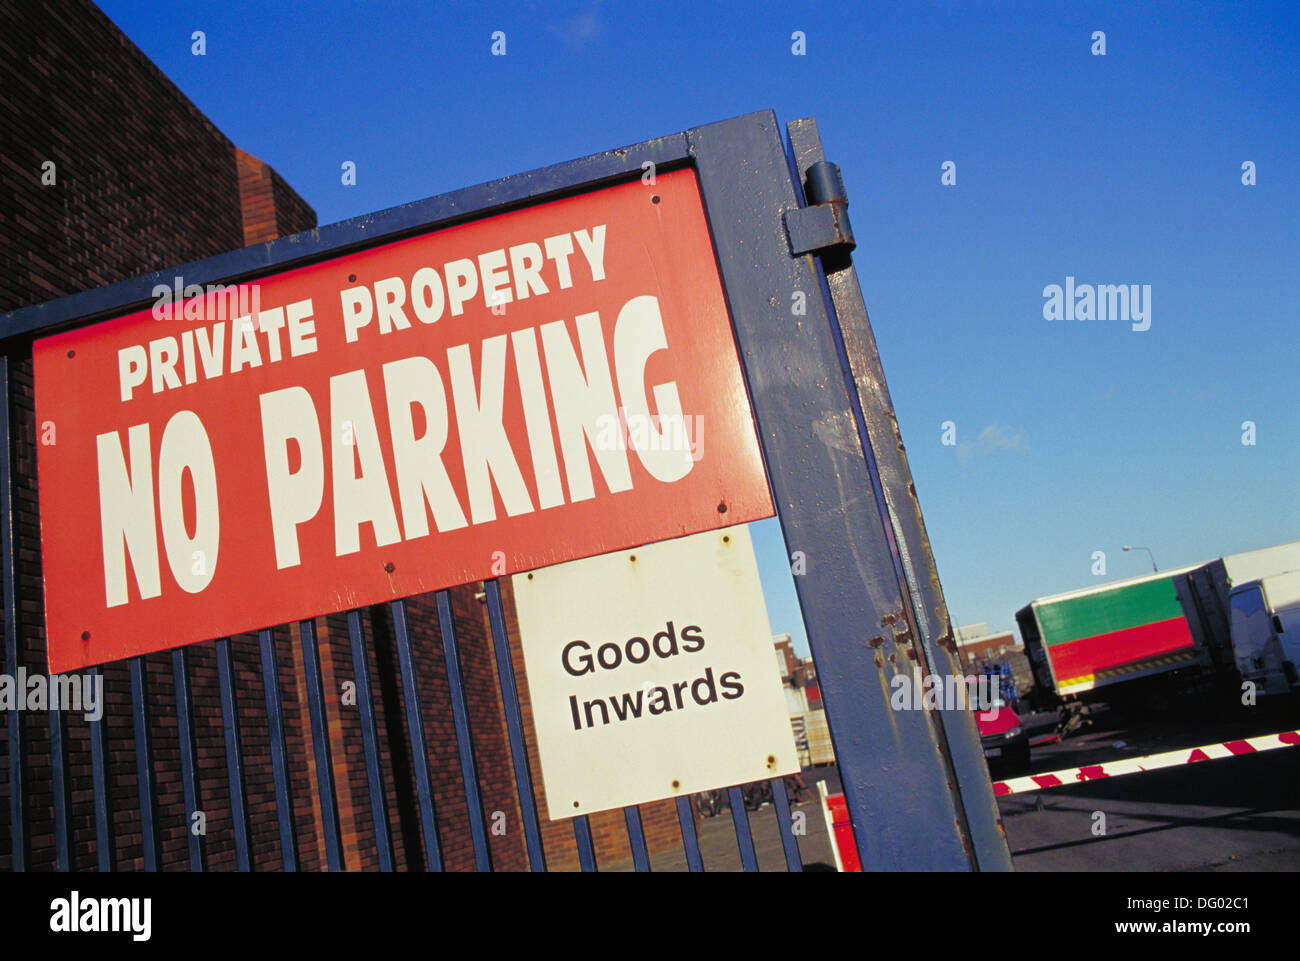 'Private property - No parking' sign Stock Photo